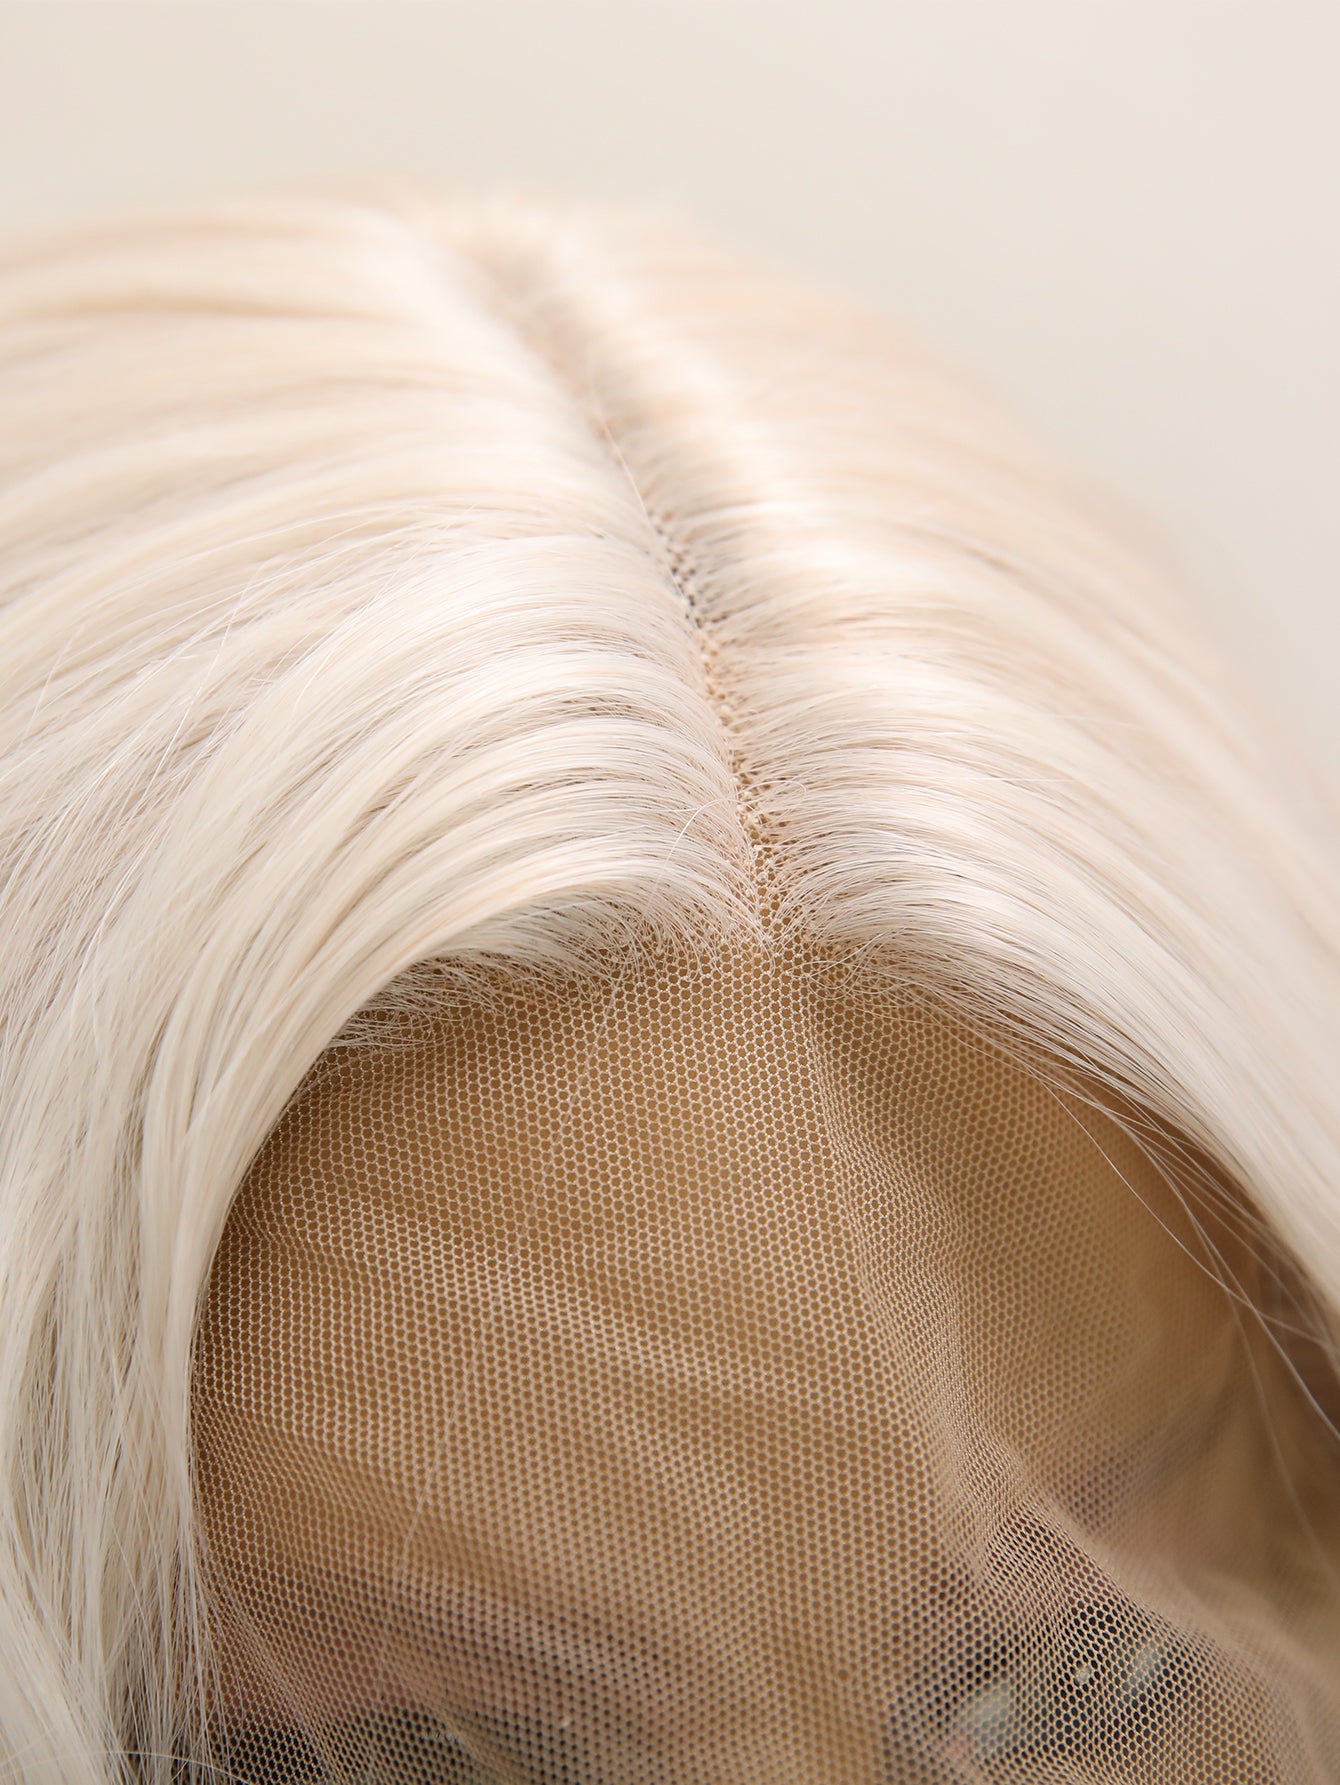 [Celestial Silver] 32-inch White Loose Wave without Bangs (Synthetic Lace Front Wig)